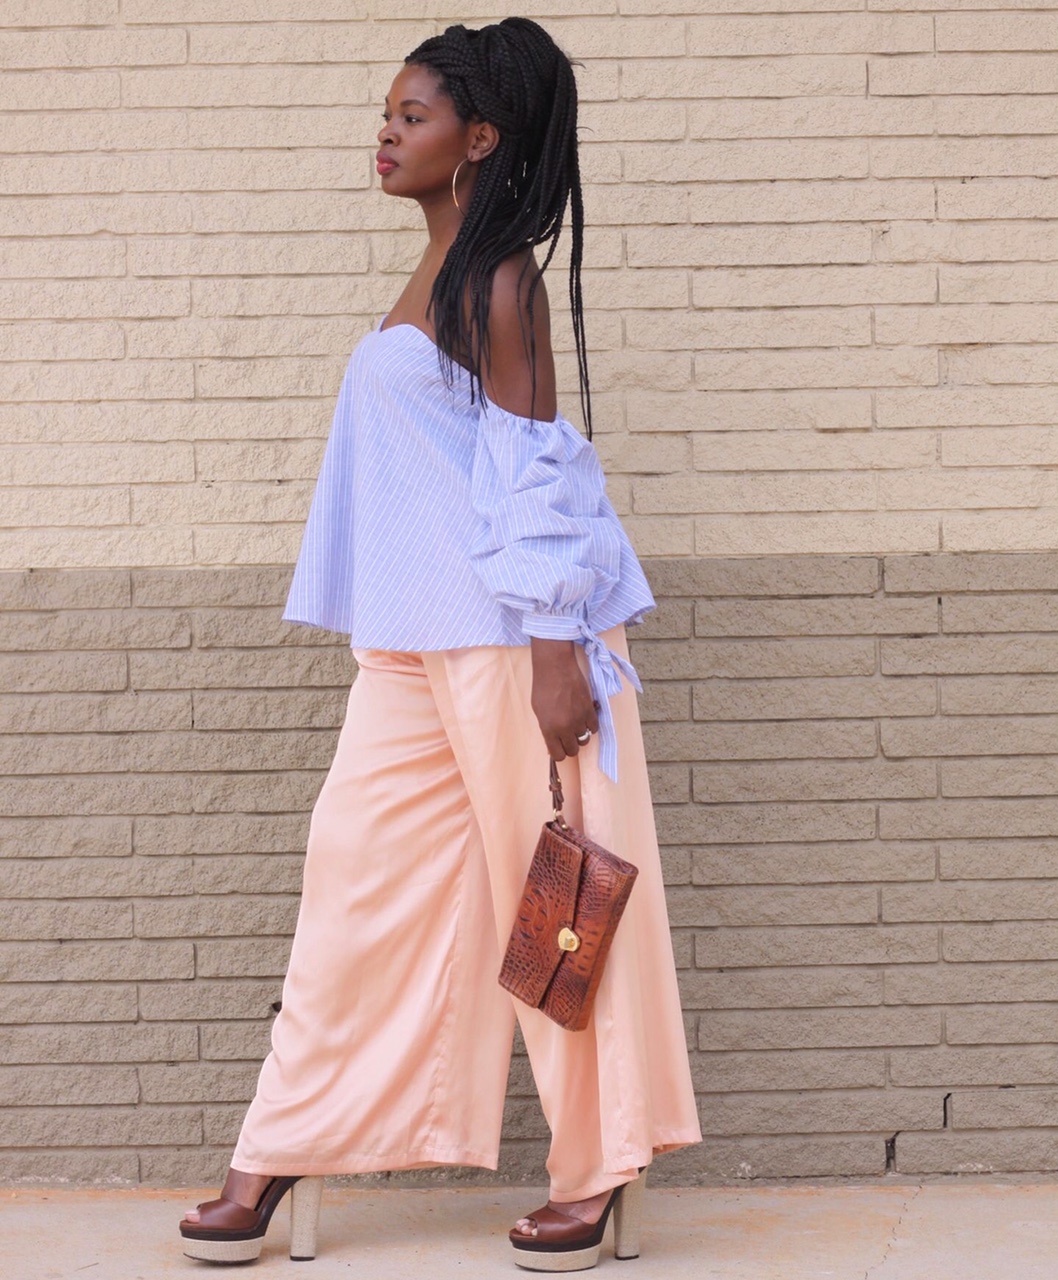 Fashion Bombshell of the Day: Nneke from ATL